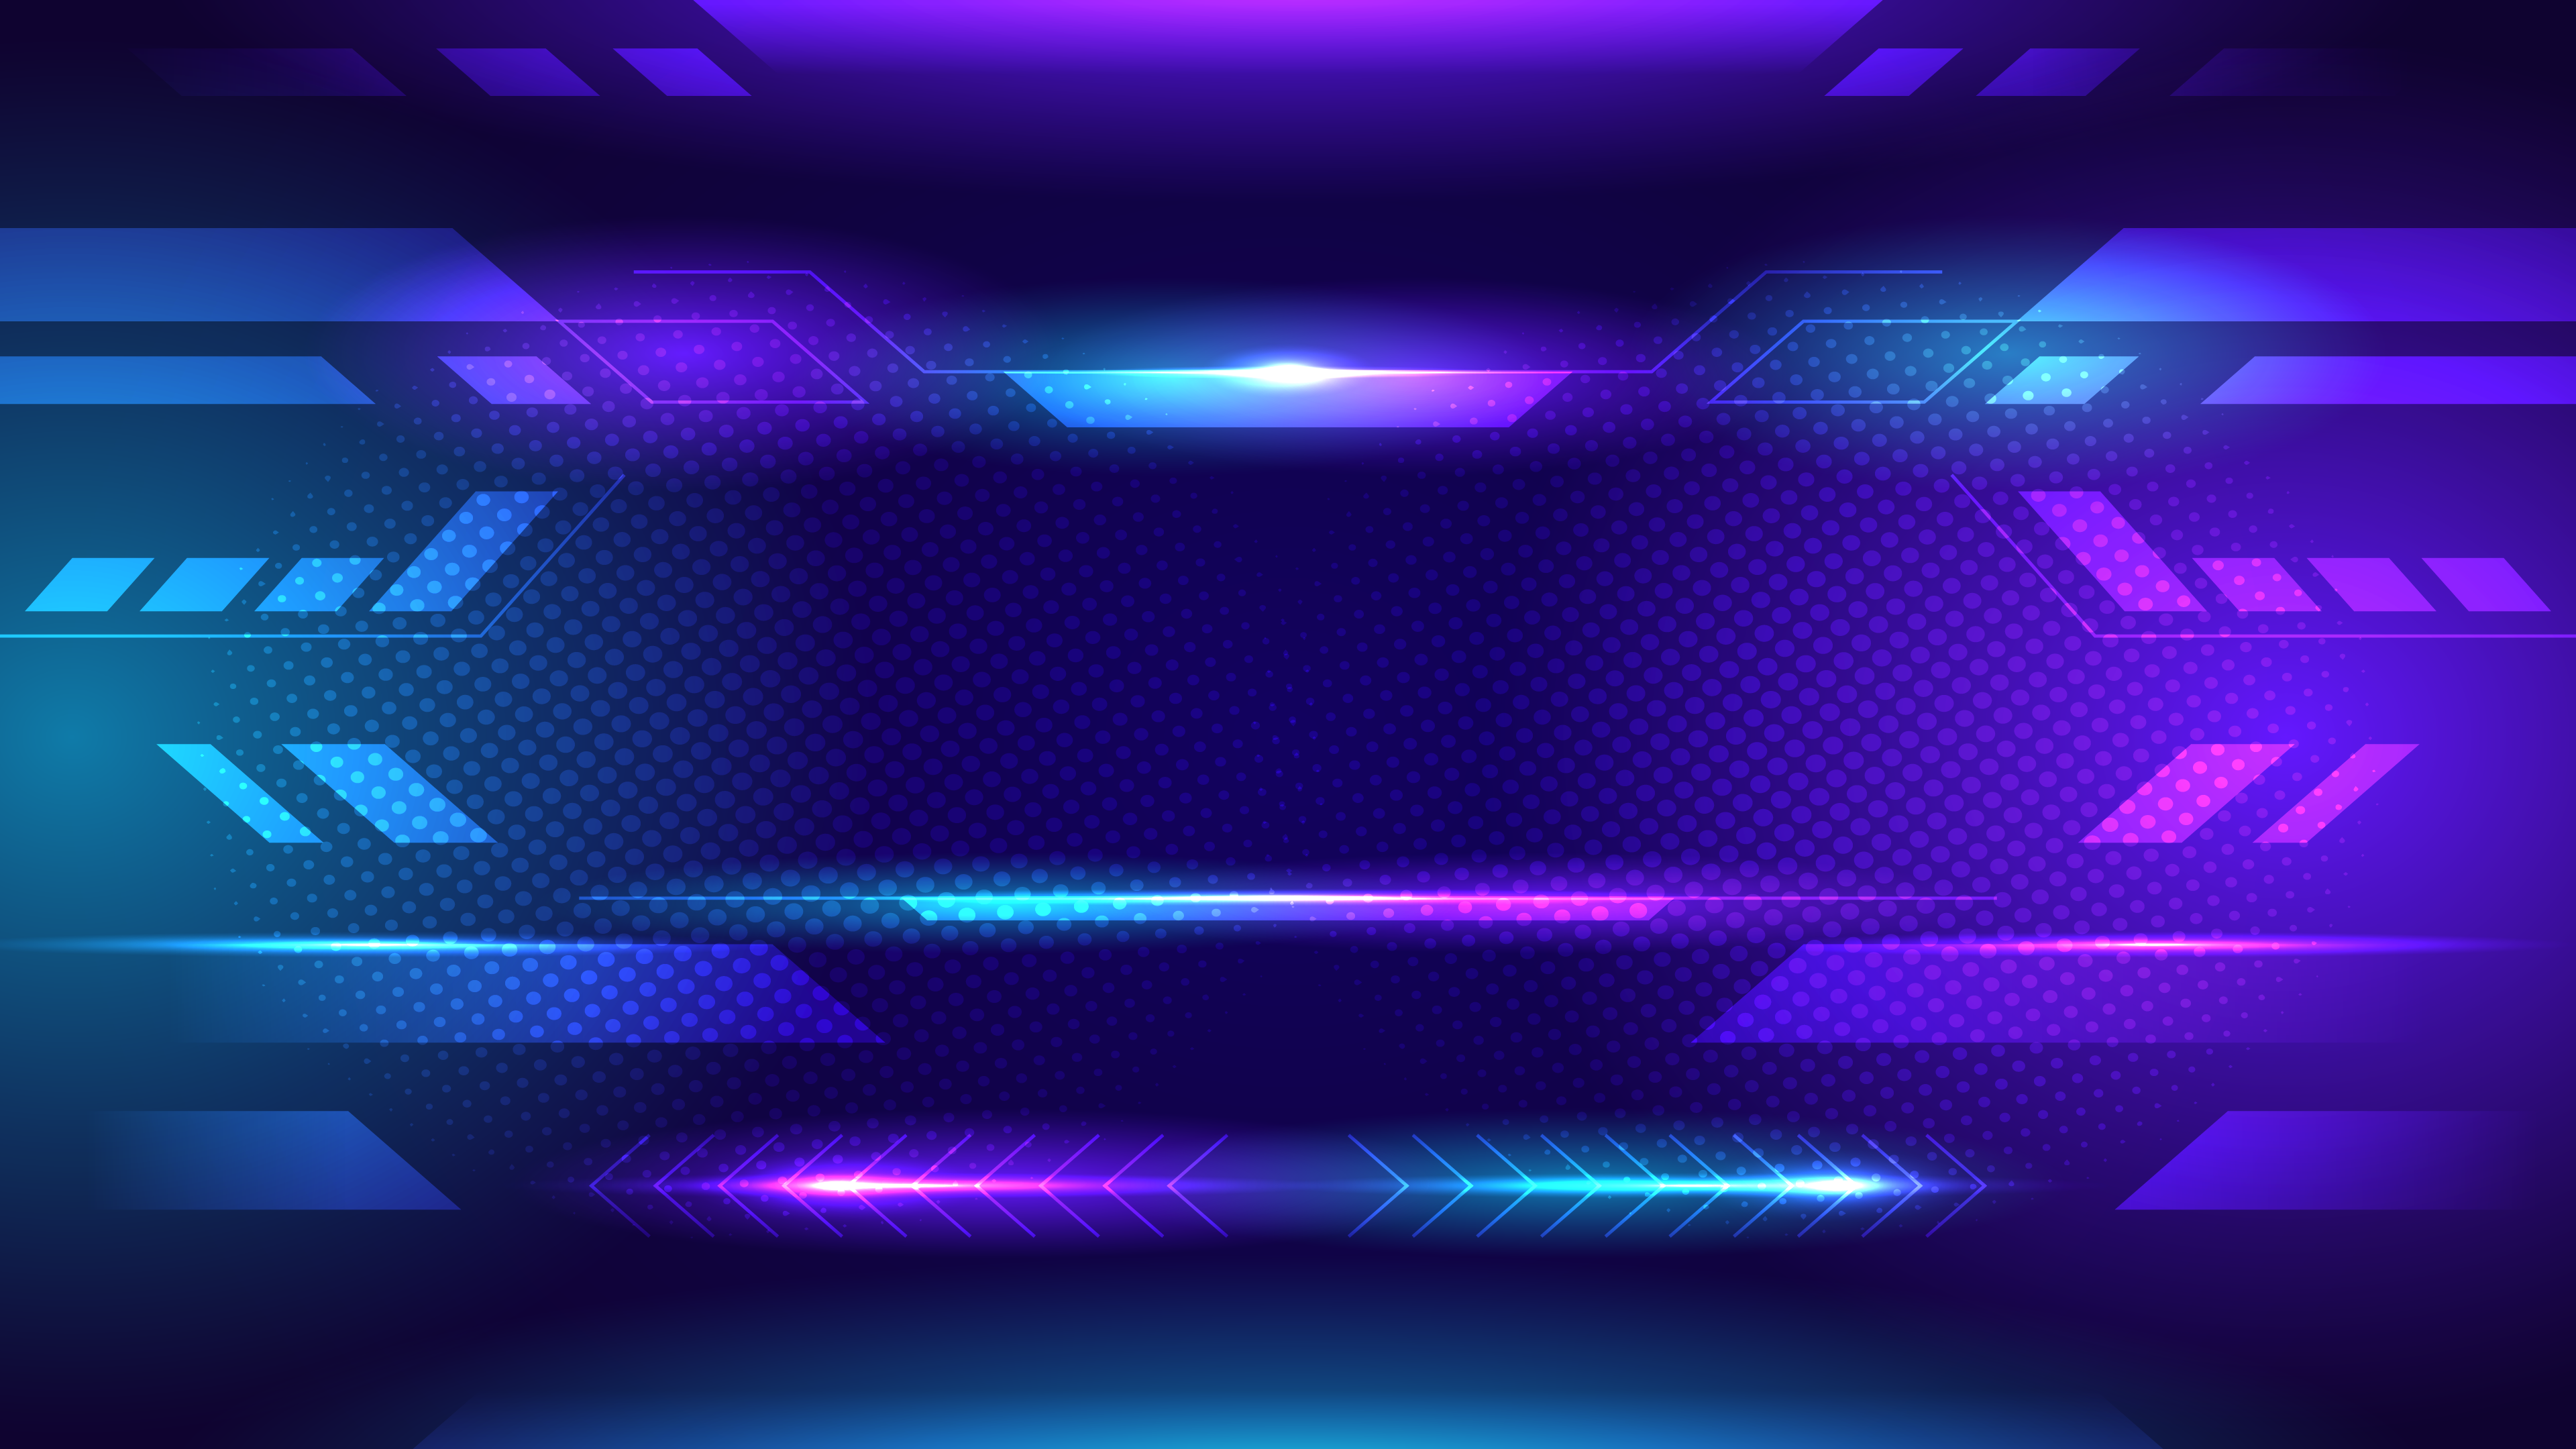 Wallpaper Galaxy Twitch Banner, Twitch, Web Banner, Streaming Media, Gamer, Background Free Image